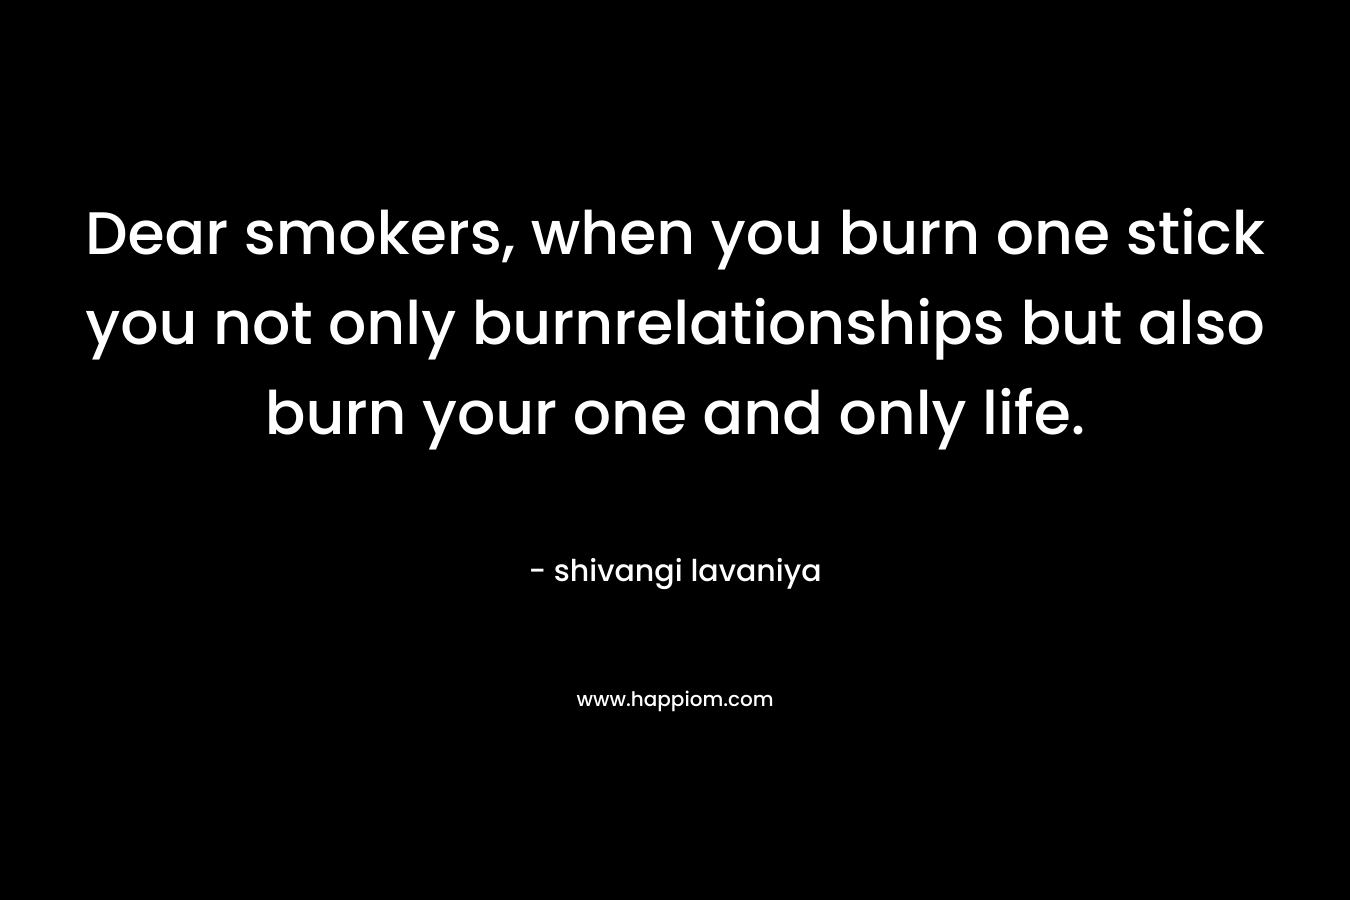 Dear smokers, when you burn one stick you not only burnrelationships but also burn your one and only life.